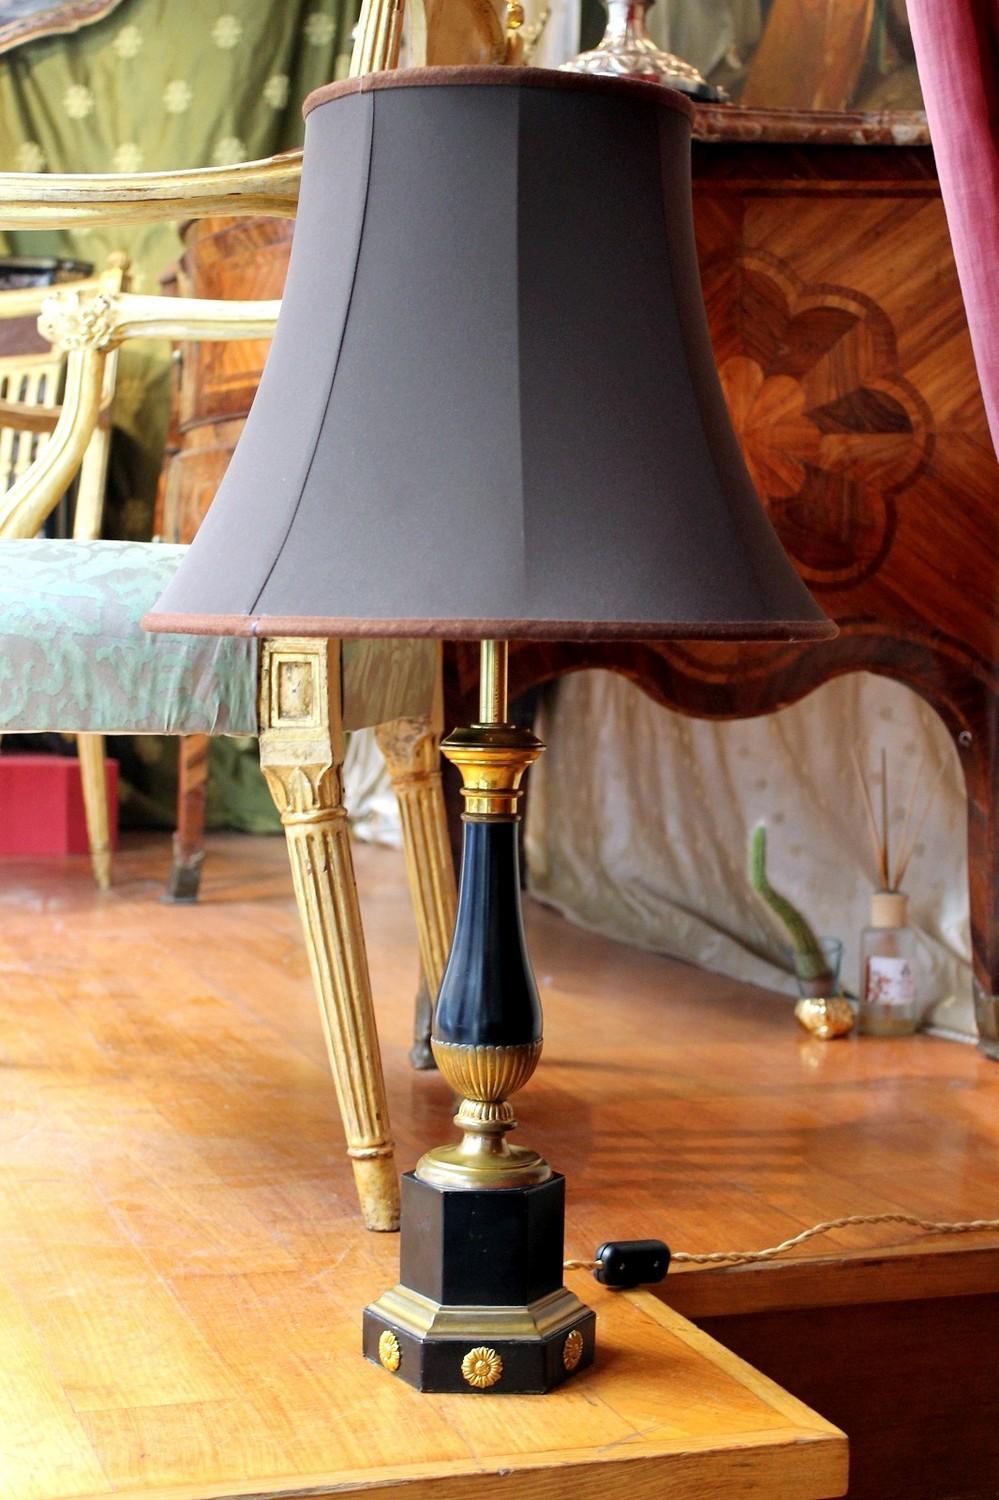 20th Century French Black Enamel Tole and Gilt Bronze Table Lamp with Silk Shade For Sale 8